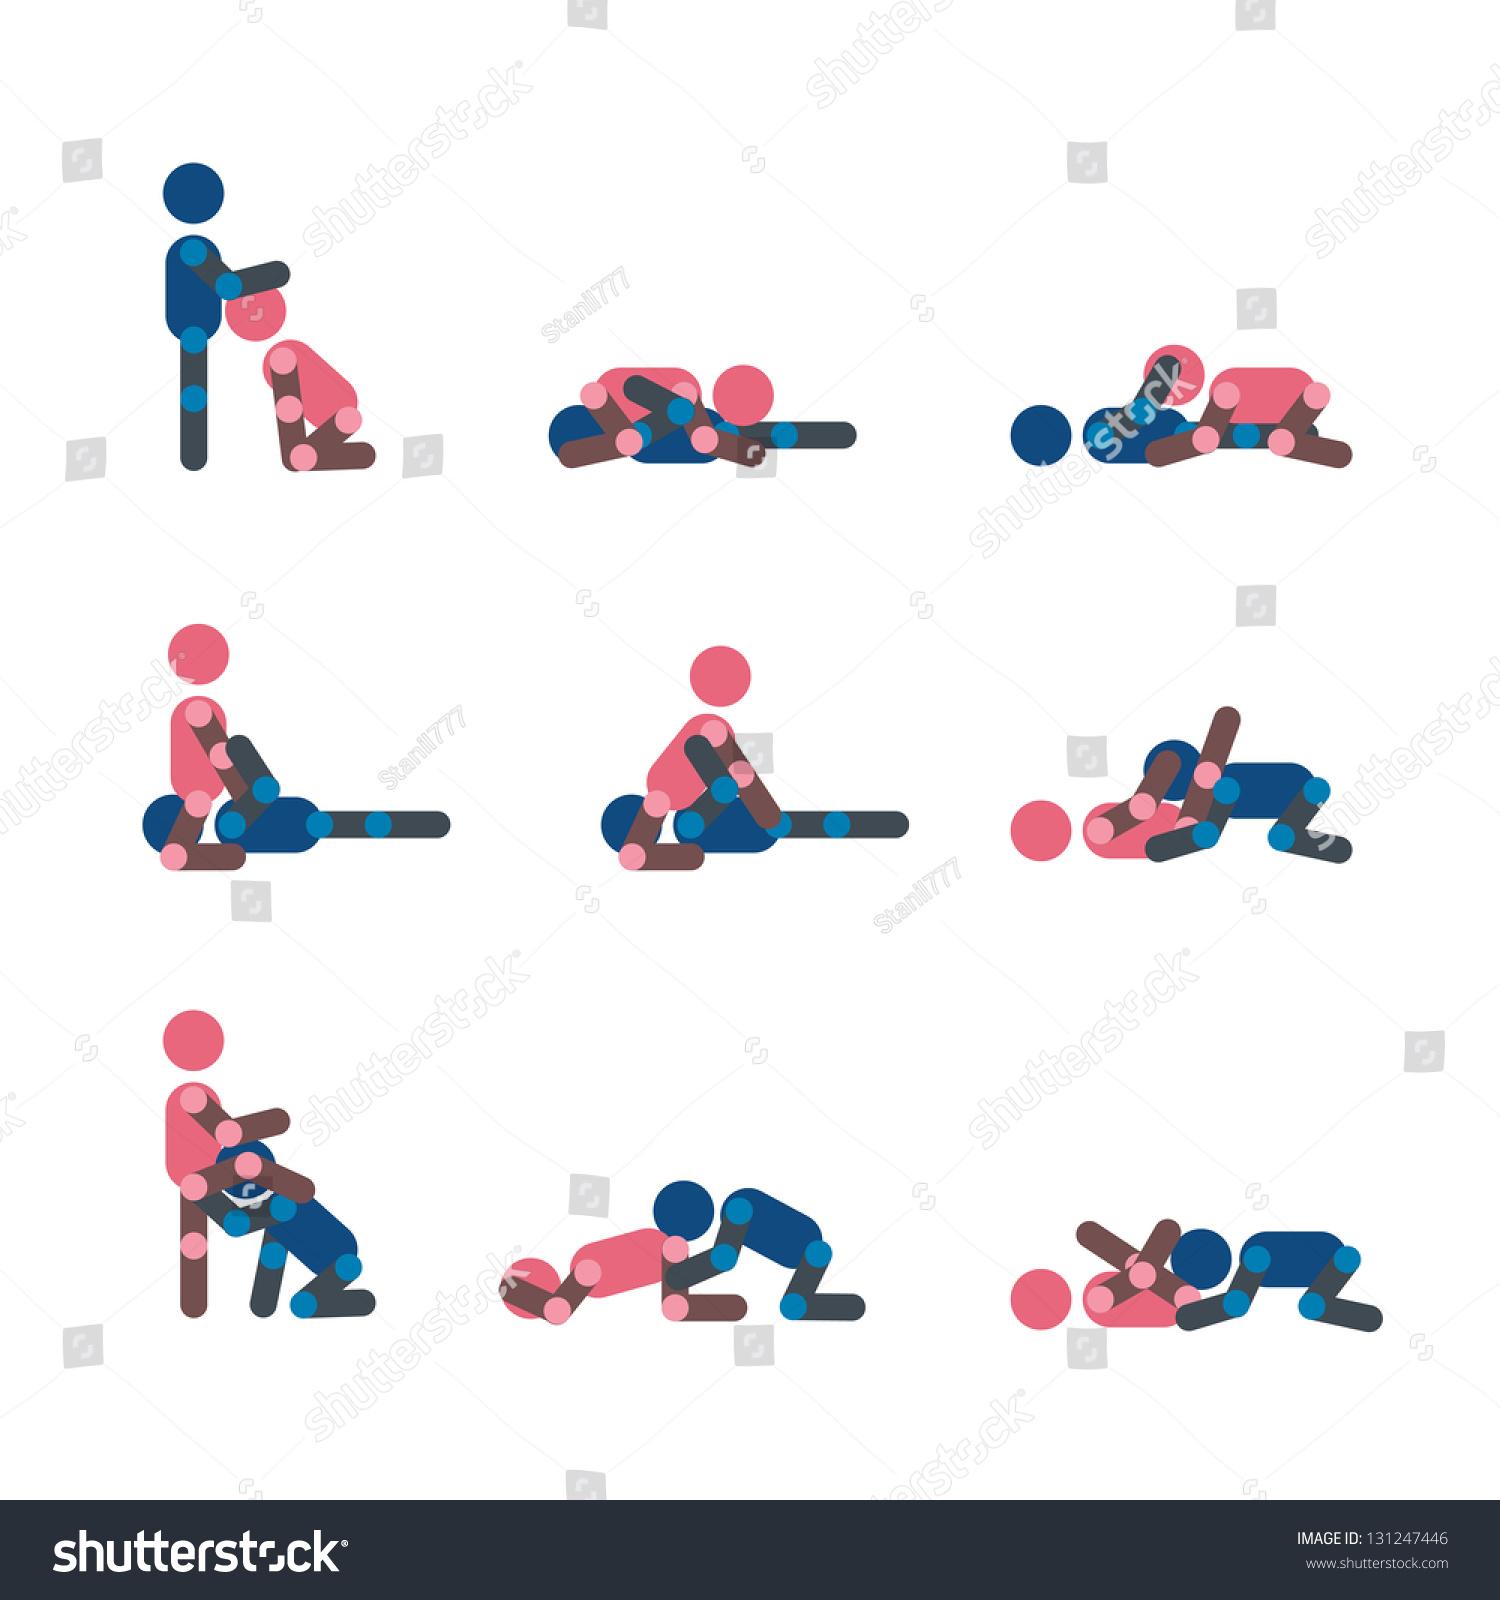 Image Of Sex Positions 31